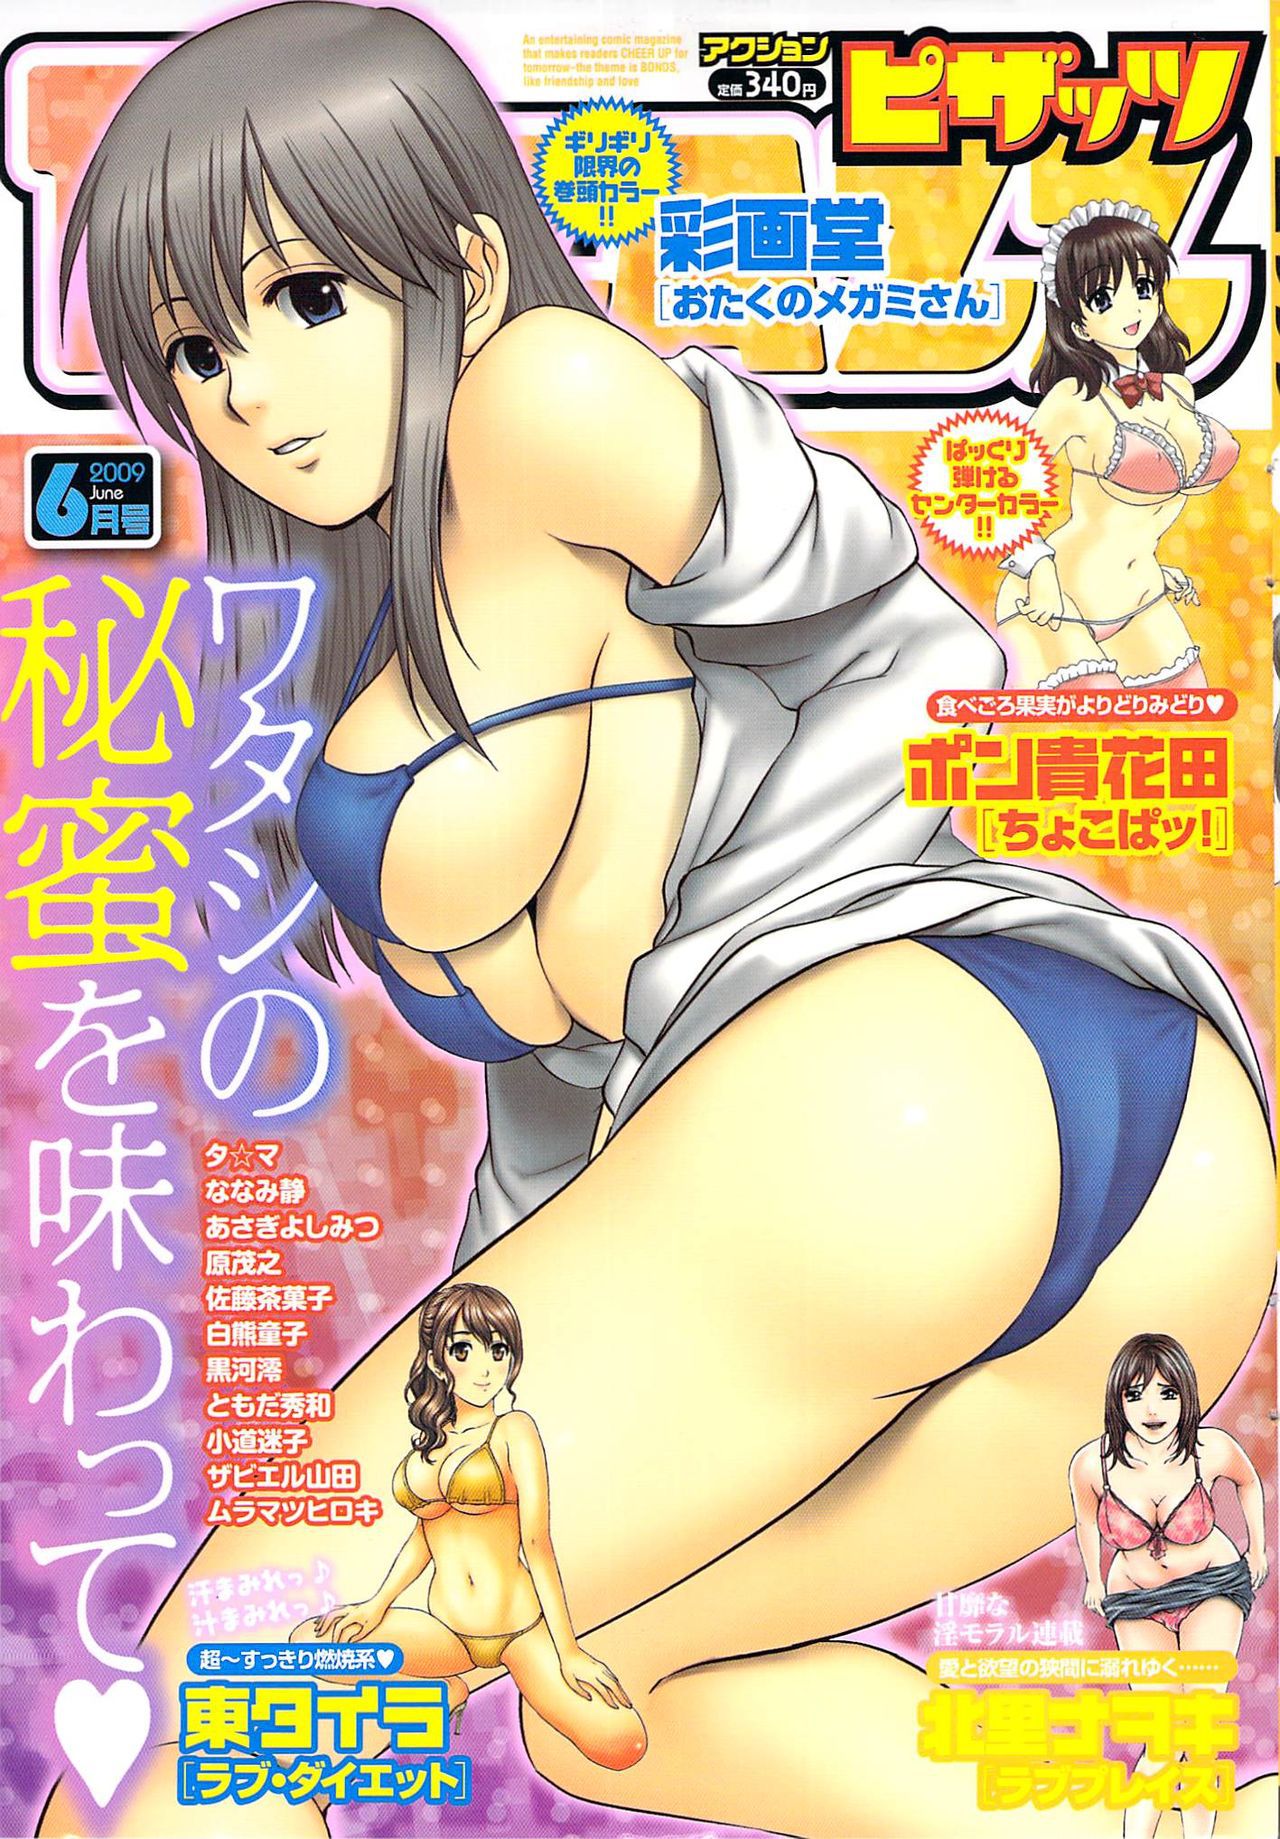 [Saigado] Cover Illustrations [彩画堂] Cover Illustrations 16